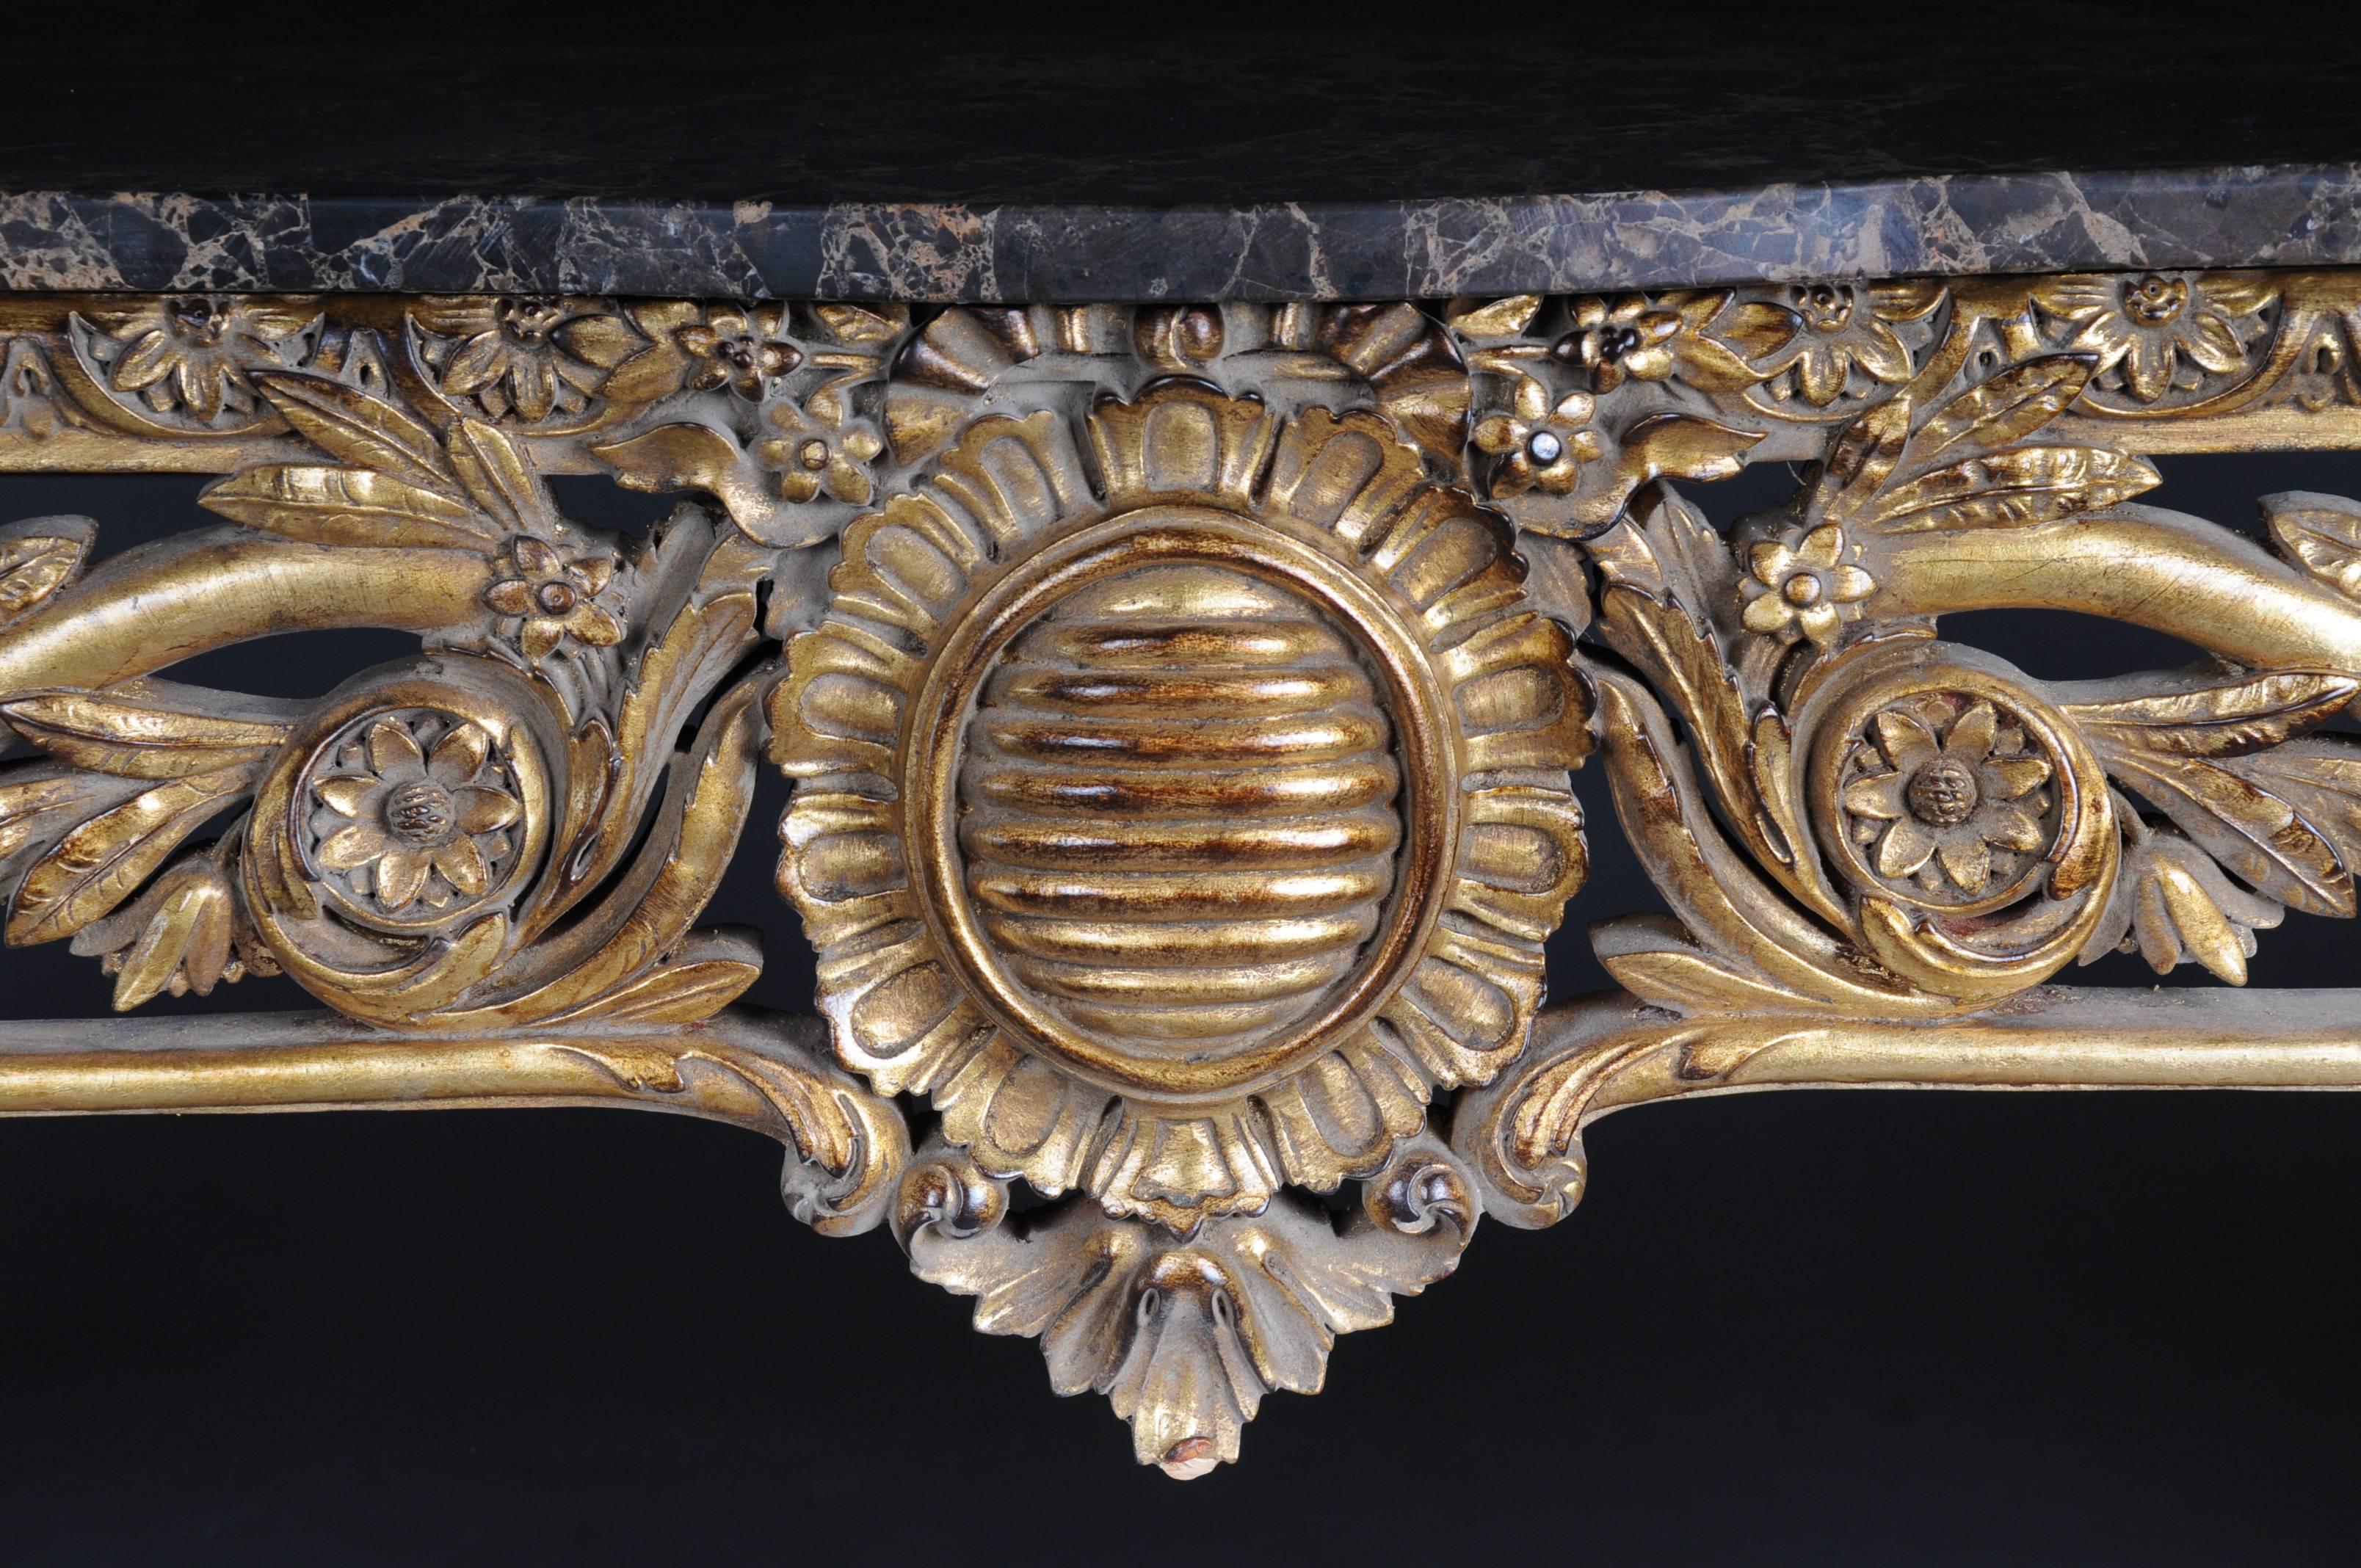 Mirror richly carved solid beech wood mirror frame and gilded.
Console: Solid beechwood, finely carved and gilded. On high slanted volute-like rolled feet connected with crossed richly carved middle bridge. Scalloped side frame. Overhanging mottled